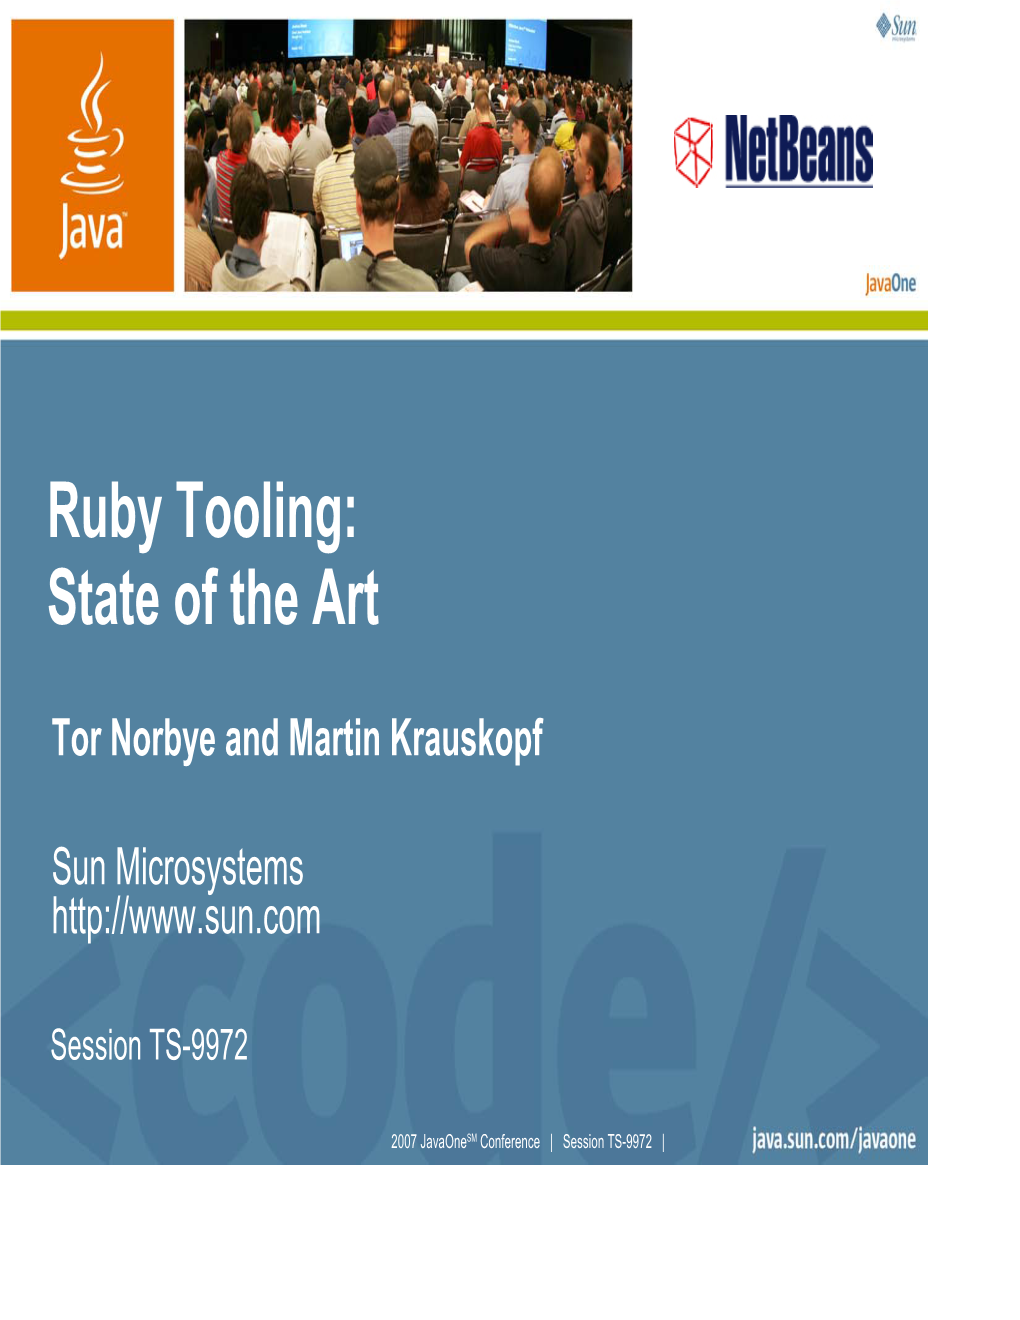 Ruby Tooling: State of the Art